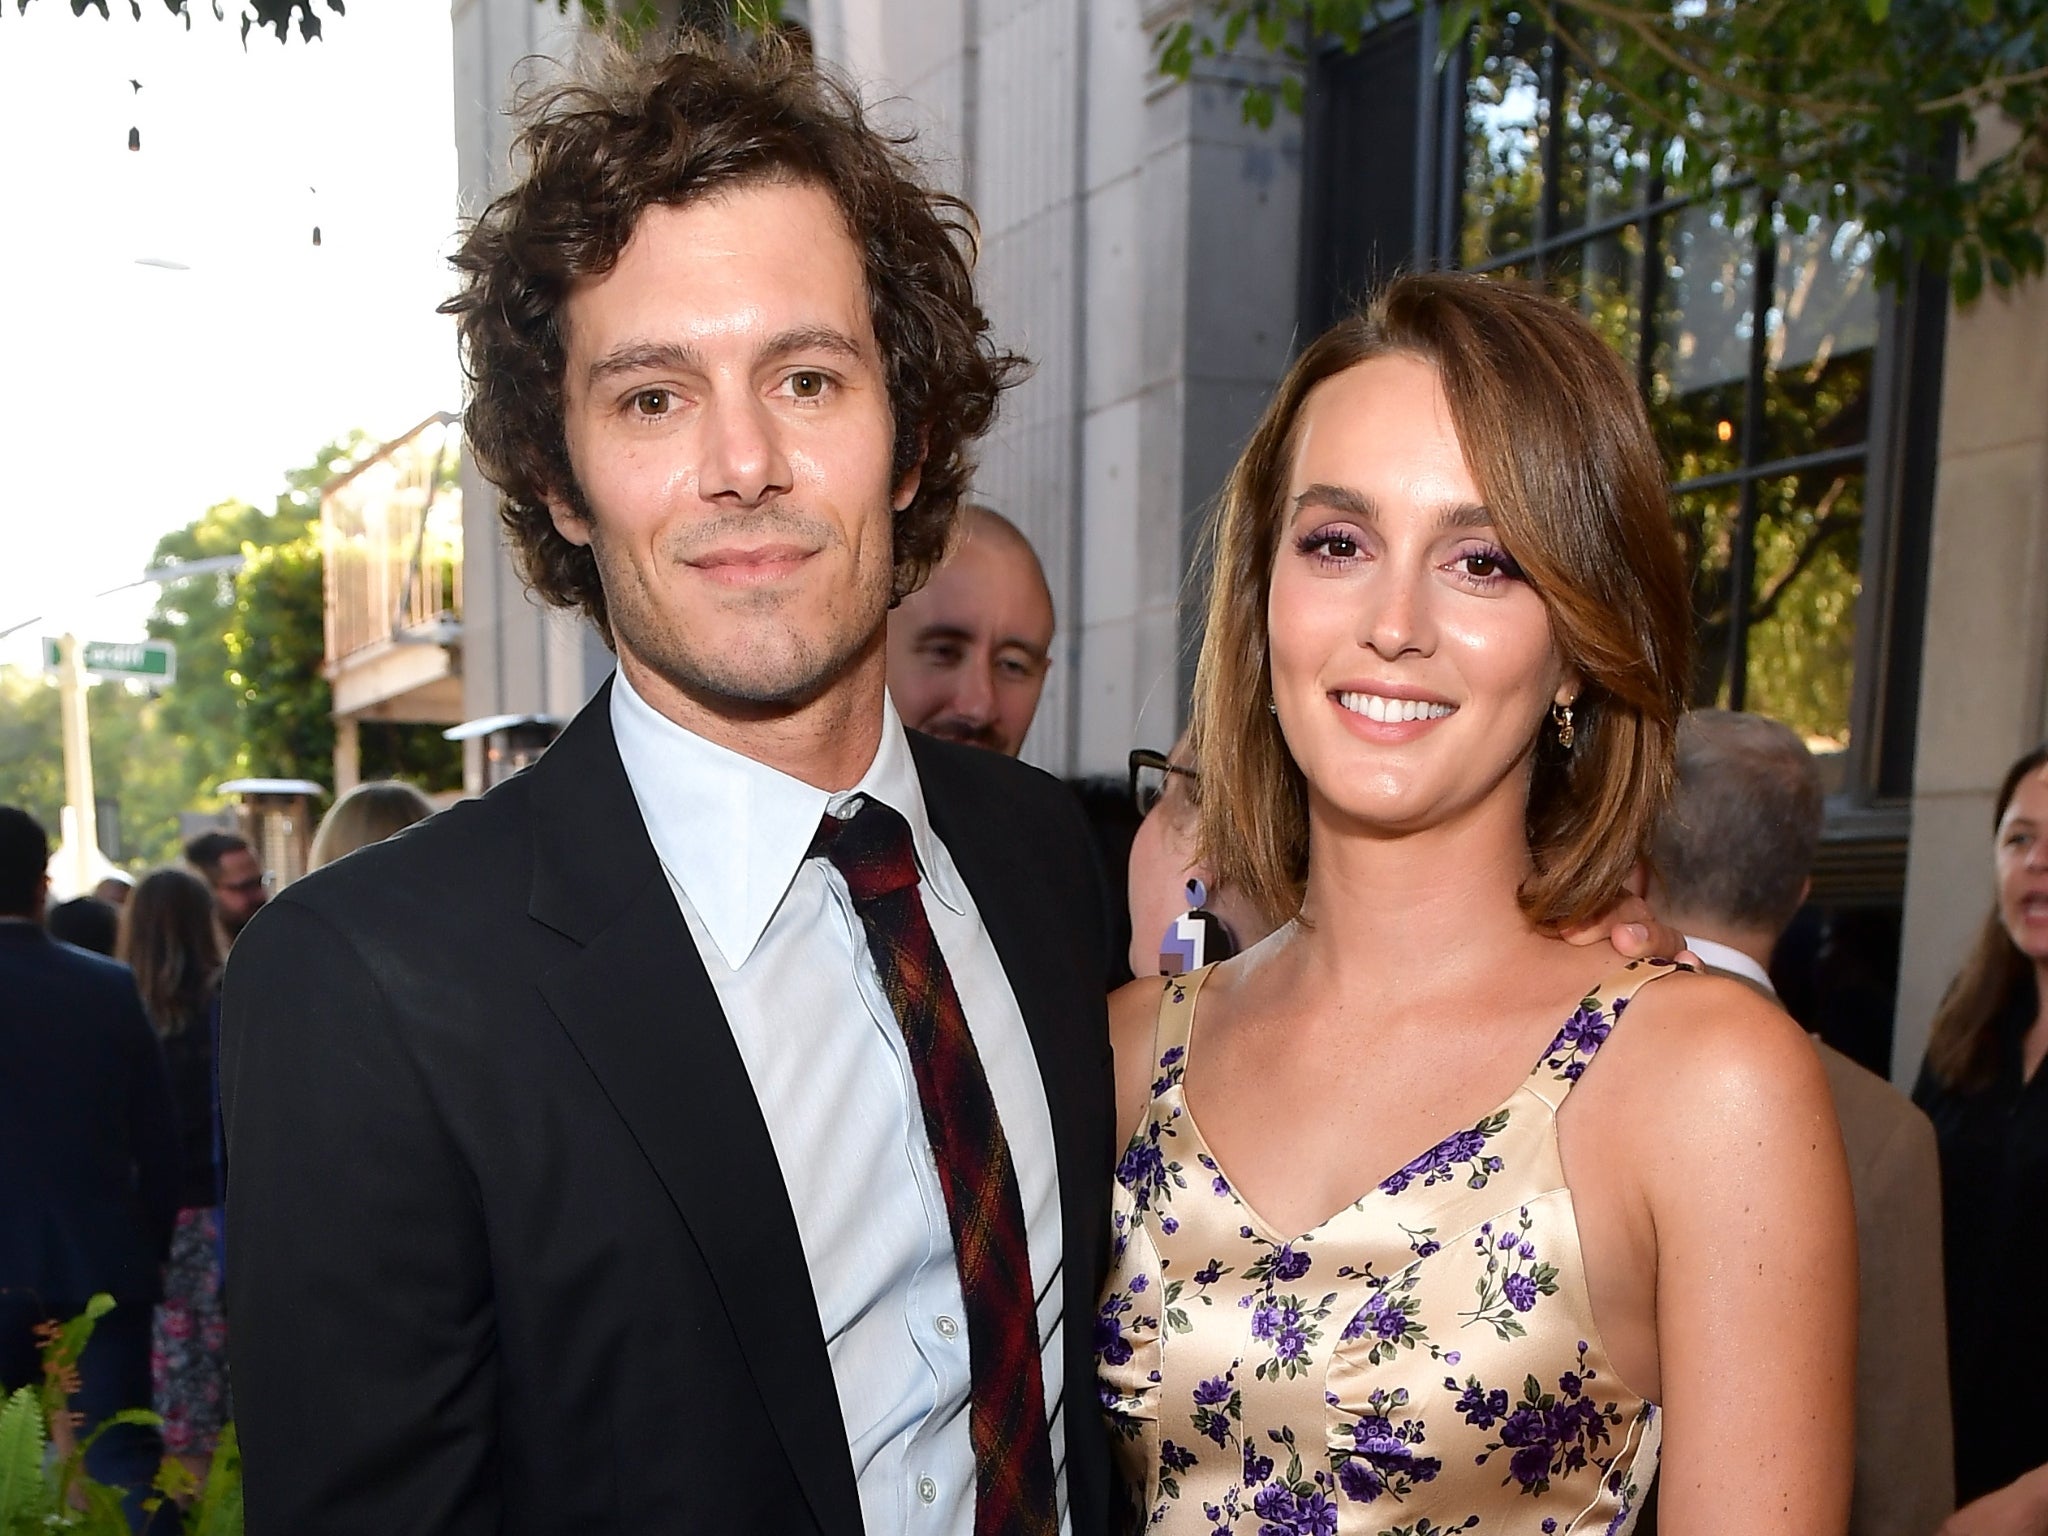 Adam Brody and Leighton Meester in 2019